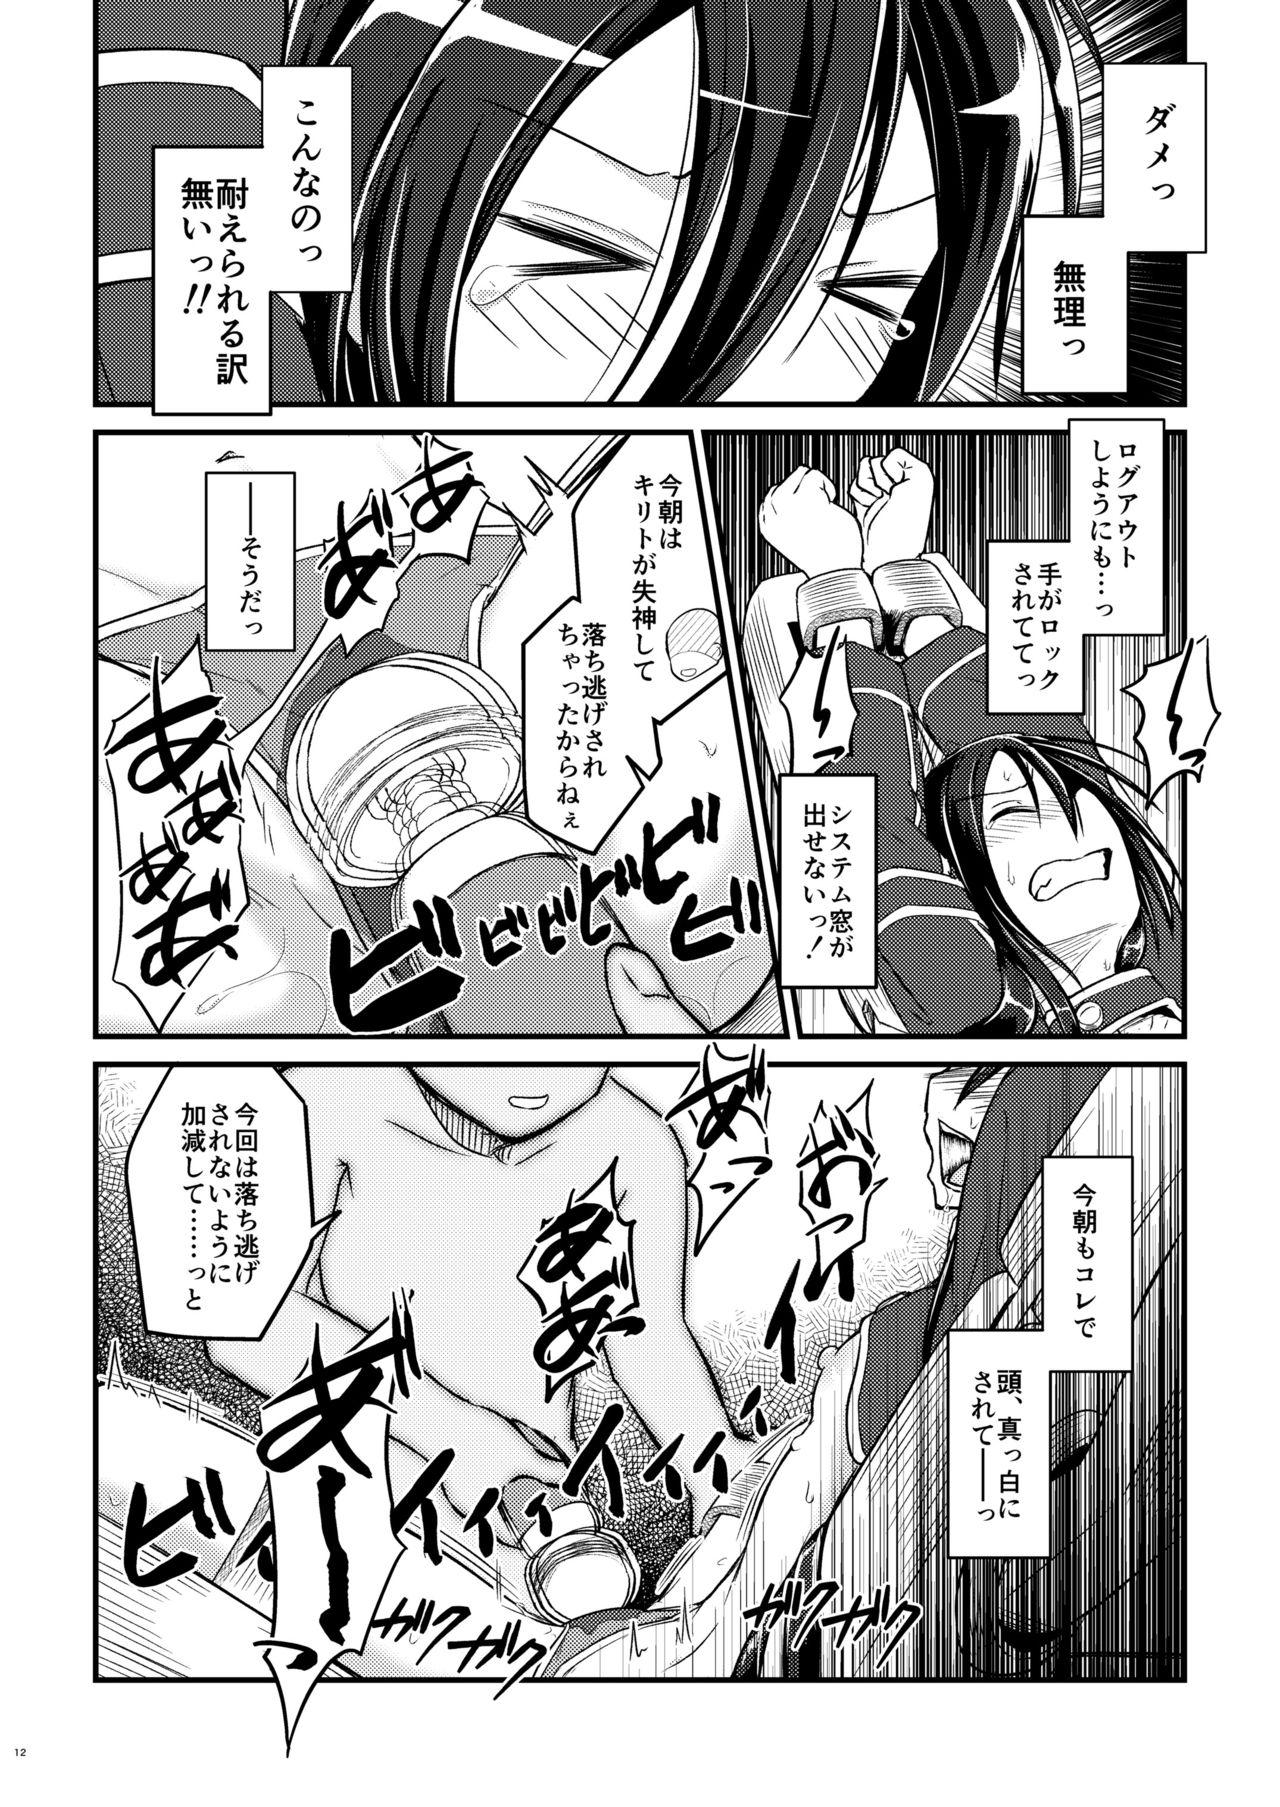 Taiwan Kiriko Route Another A Part Set - Sword art online Swinger - Page 11